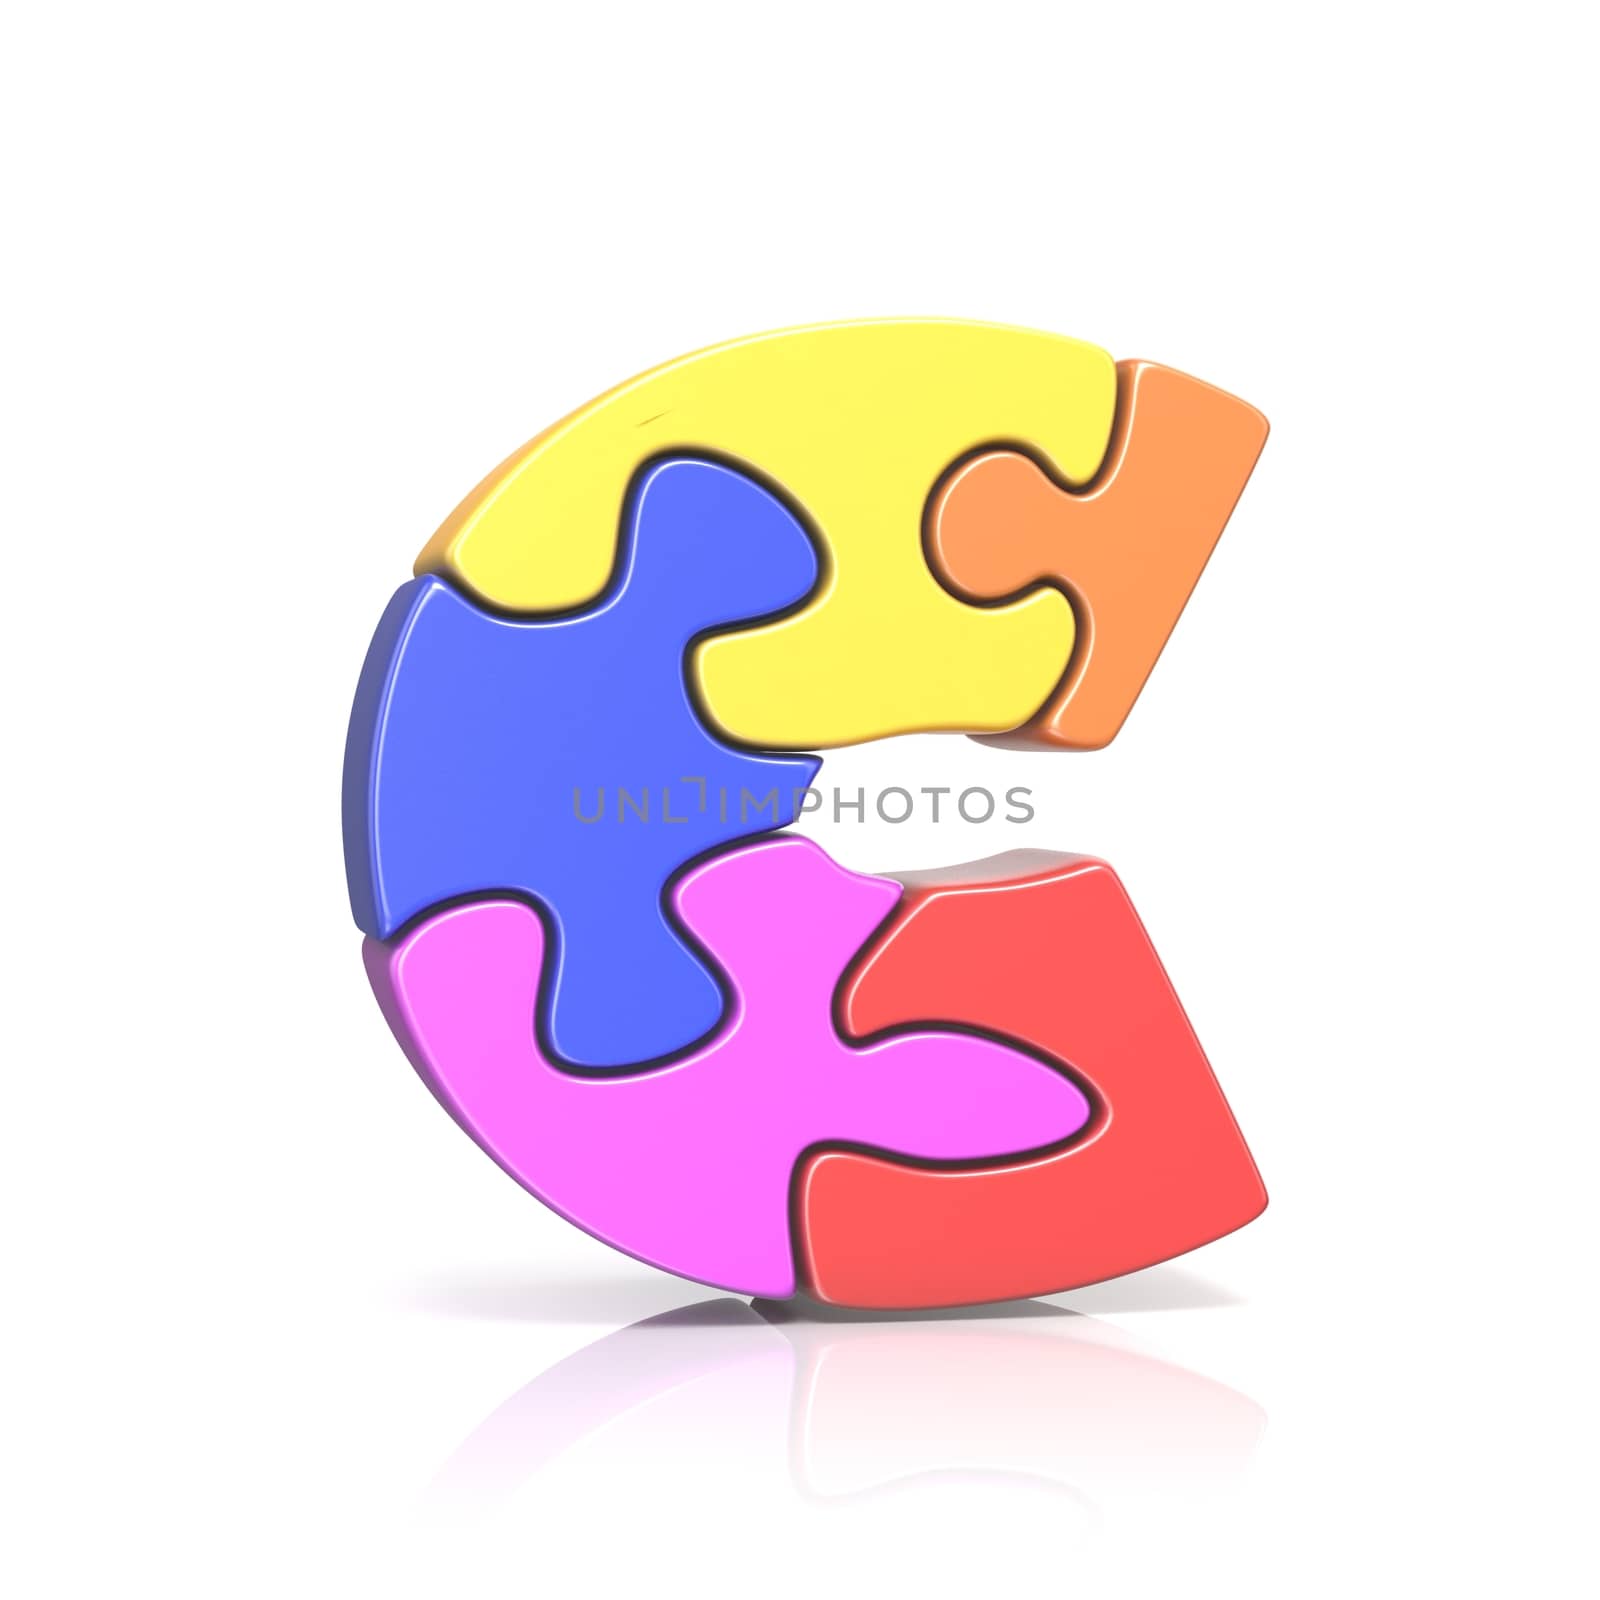 Puzzle jigsaw letter C 3D render illustration isolated on white background